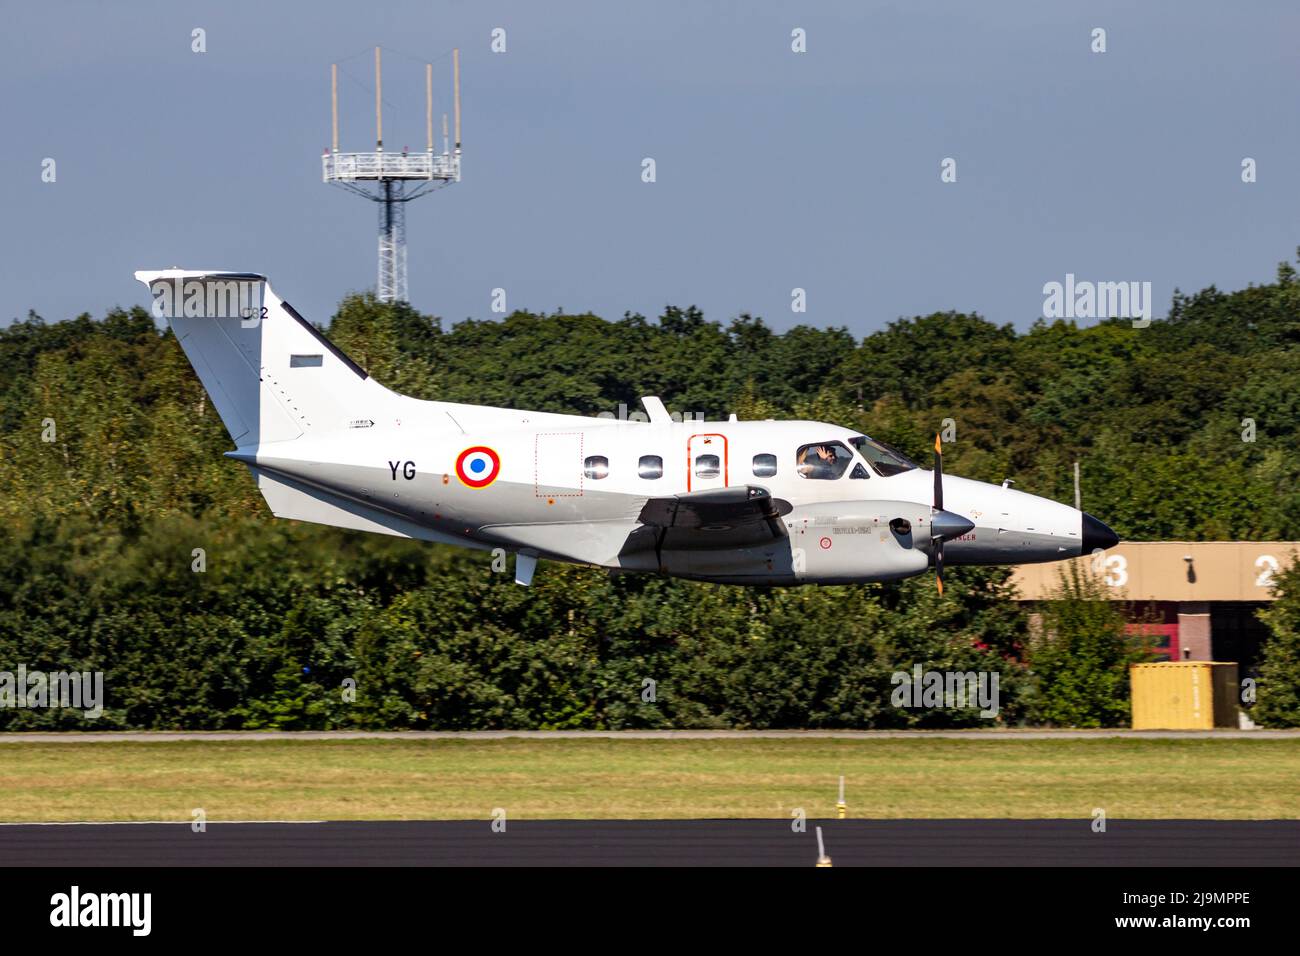 French Air Force Embraer EMB-121 Xingu plane making a low-pass over Gilze-Rijen Air Base. September 7, 2016 Stock Photo